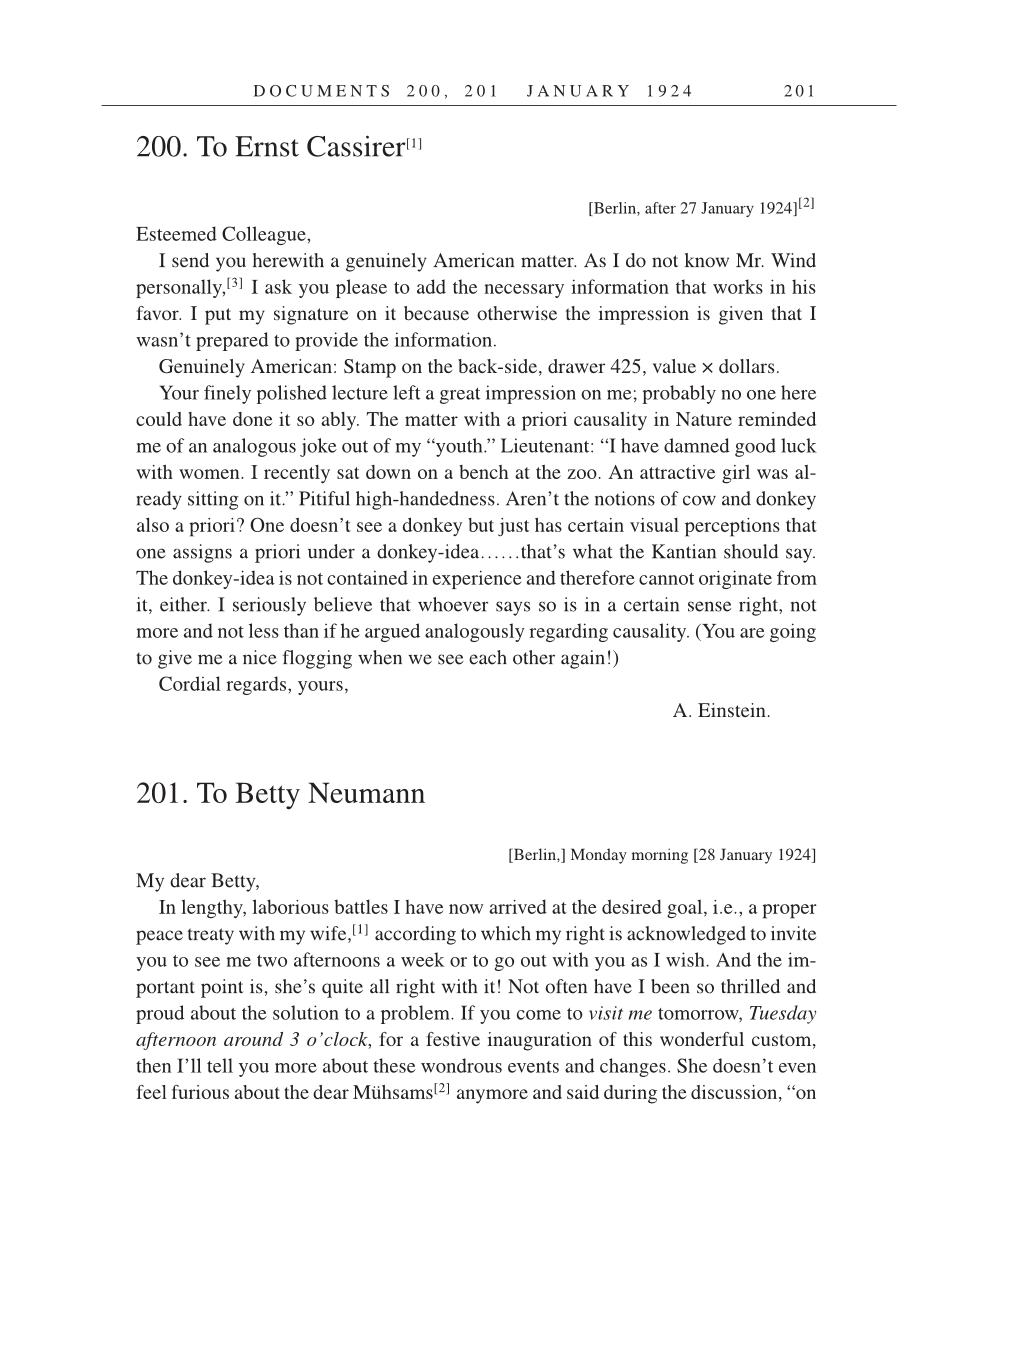 Volume 14: The Berlin Years: Writings & Correspondence, April 1923-May 1925 (English Translation Supplement) page 201